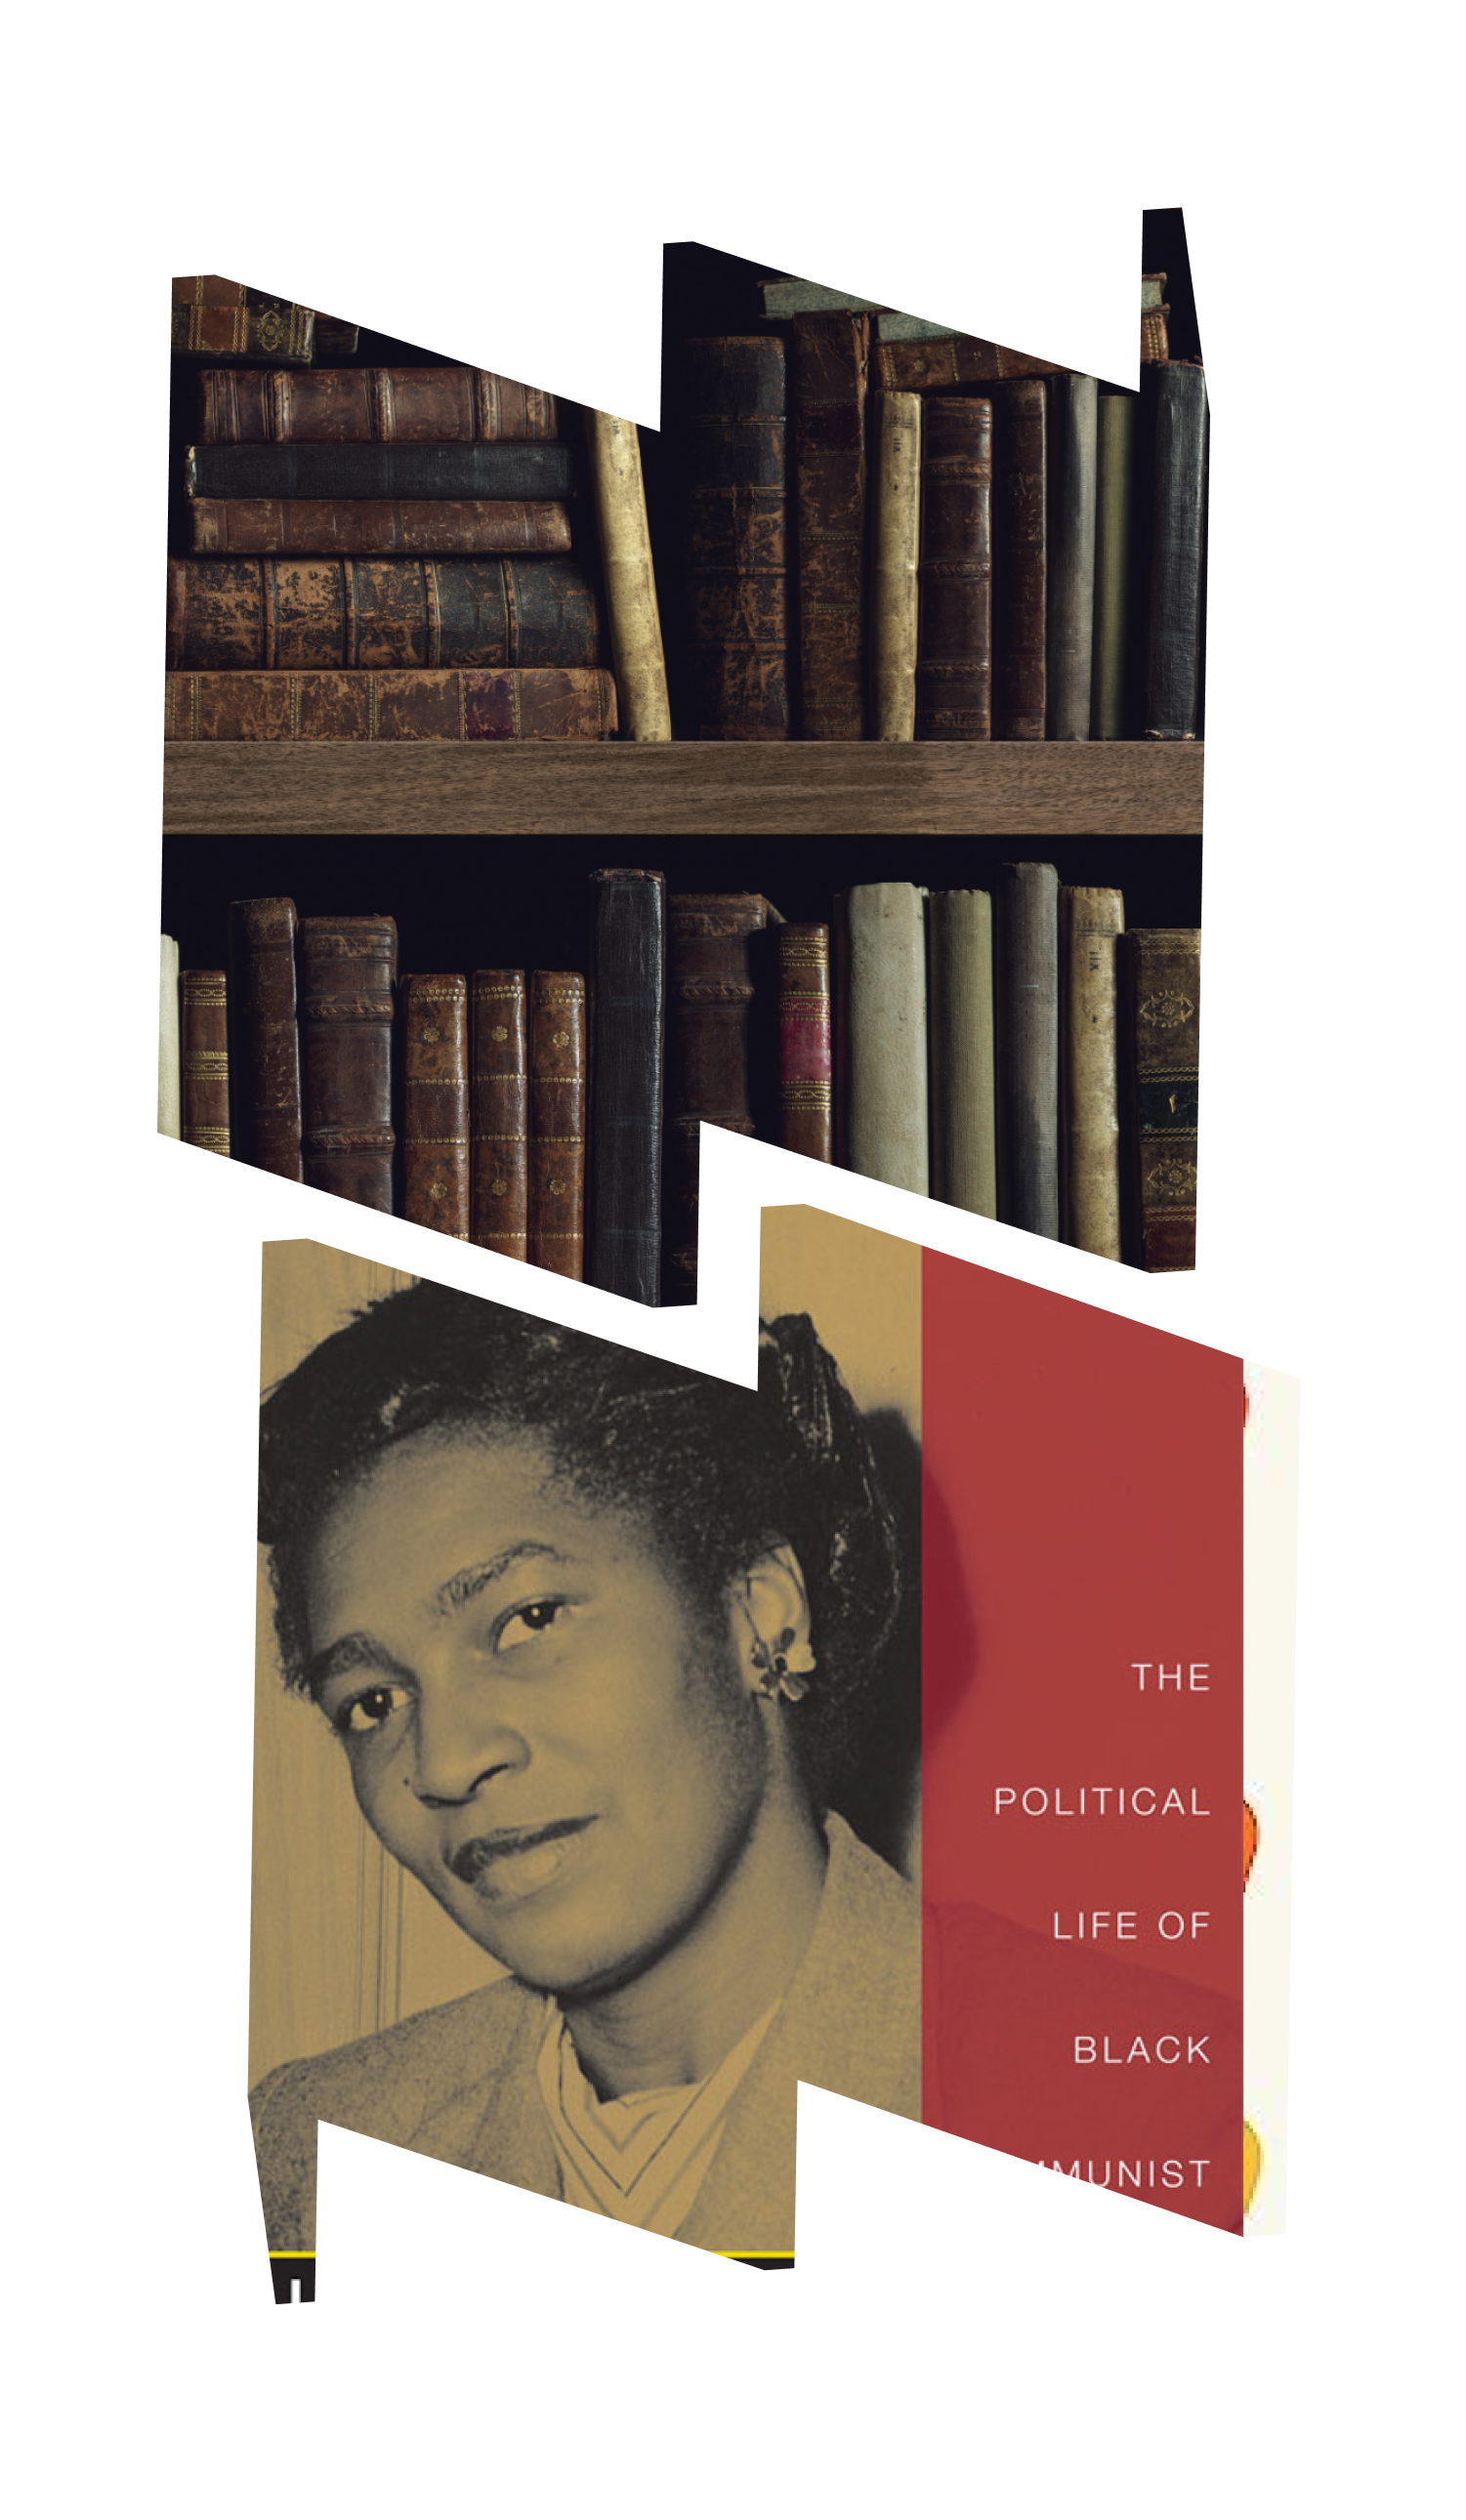 In top "W" frame, image of books on a shelf; in bottom "M" frame, partial view of the "Parable of the Sower" book cover featuring illustration of a woman with red hat and red dress.